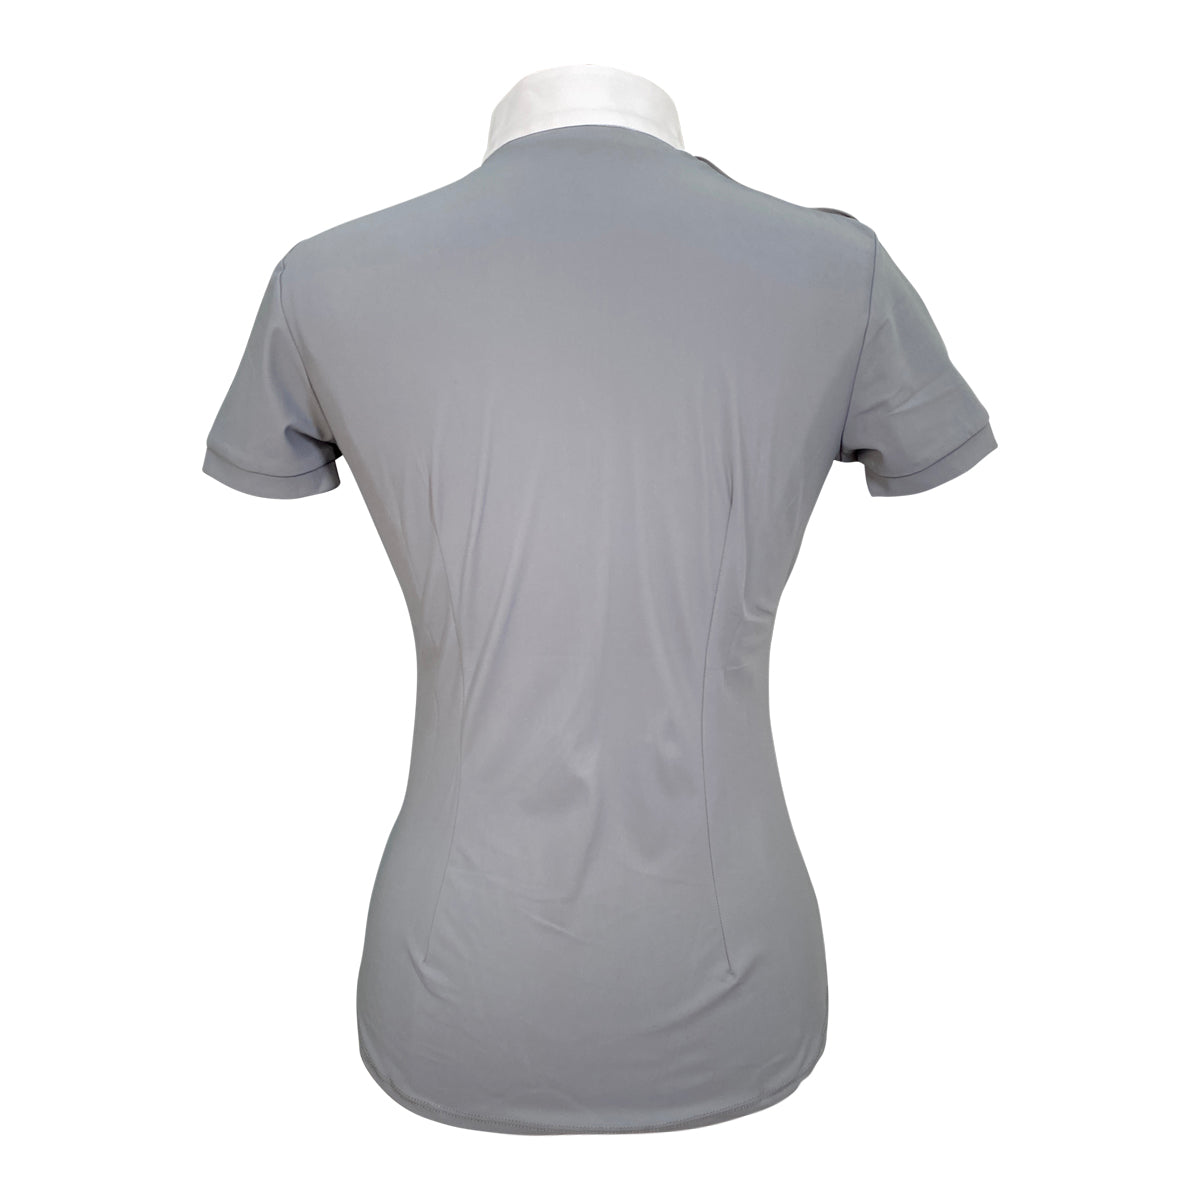 Vestrum Camaiore Short Sleeve Competition Shirt in Grey/White